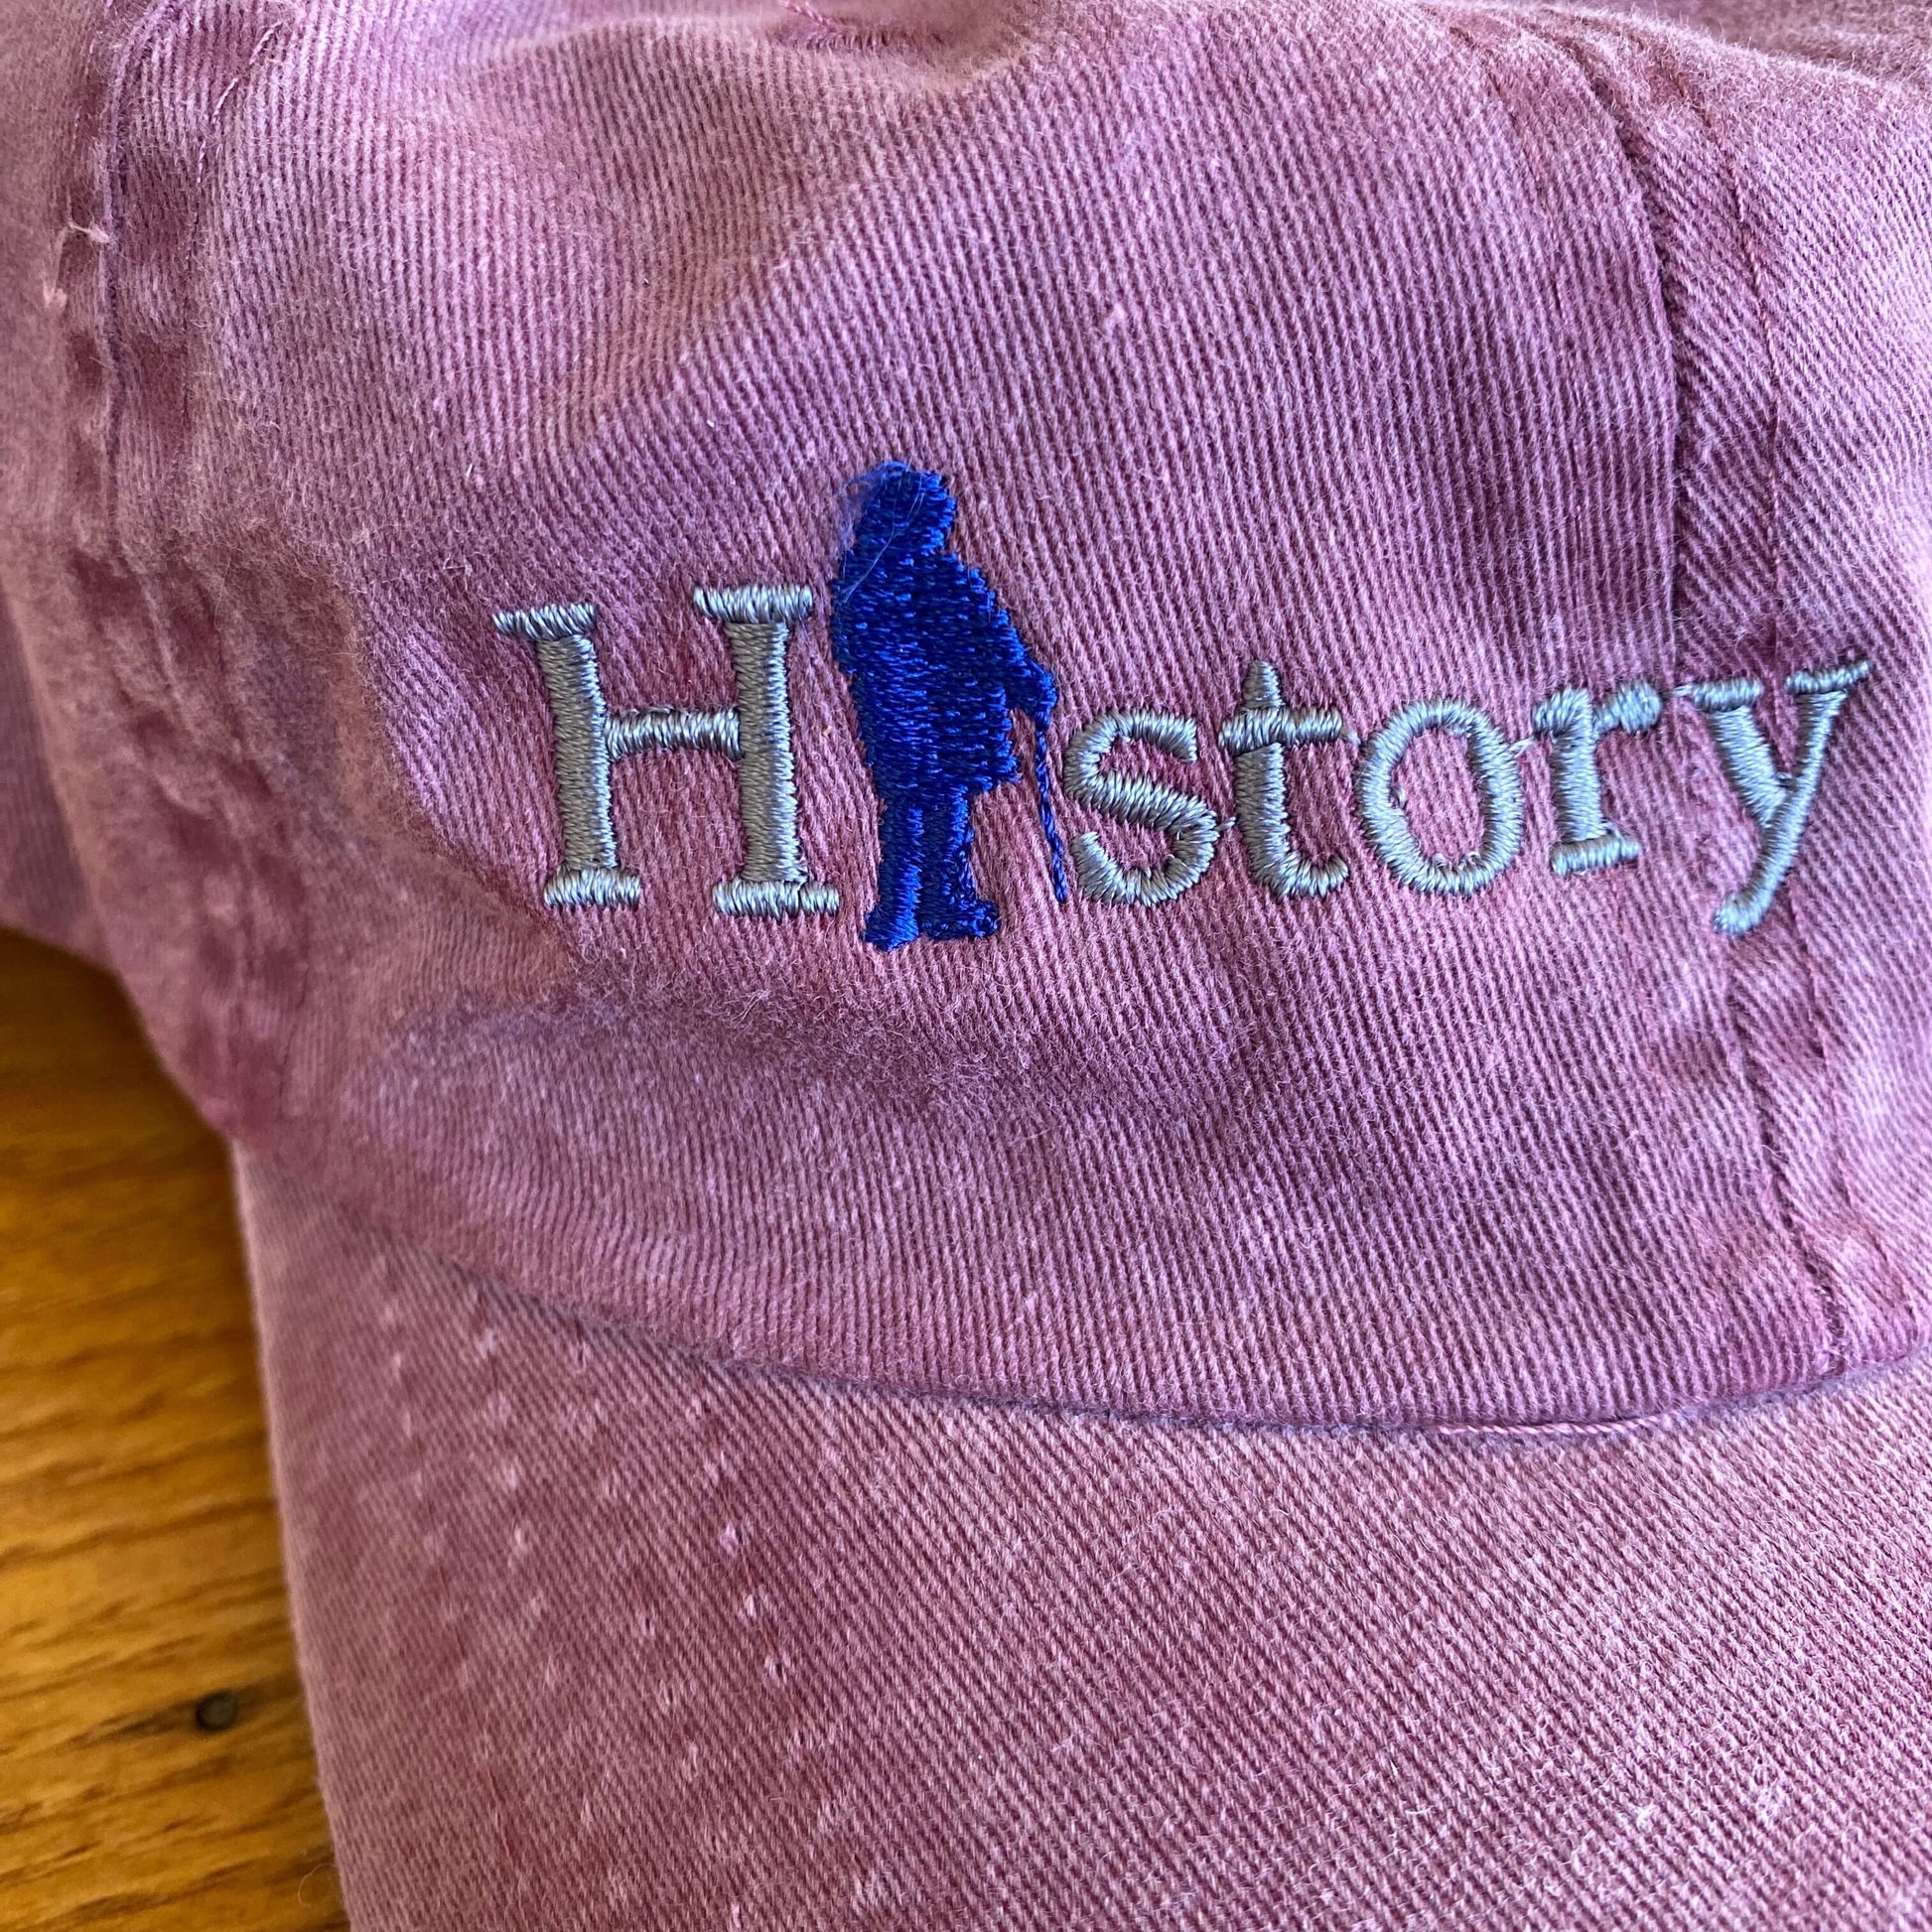 Embroidered "History Nerd" with Ben Franklin cap - Maroon from The History List Store